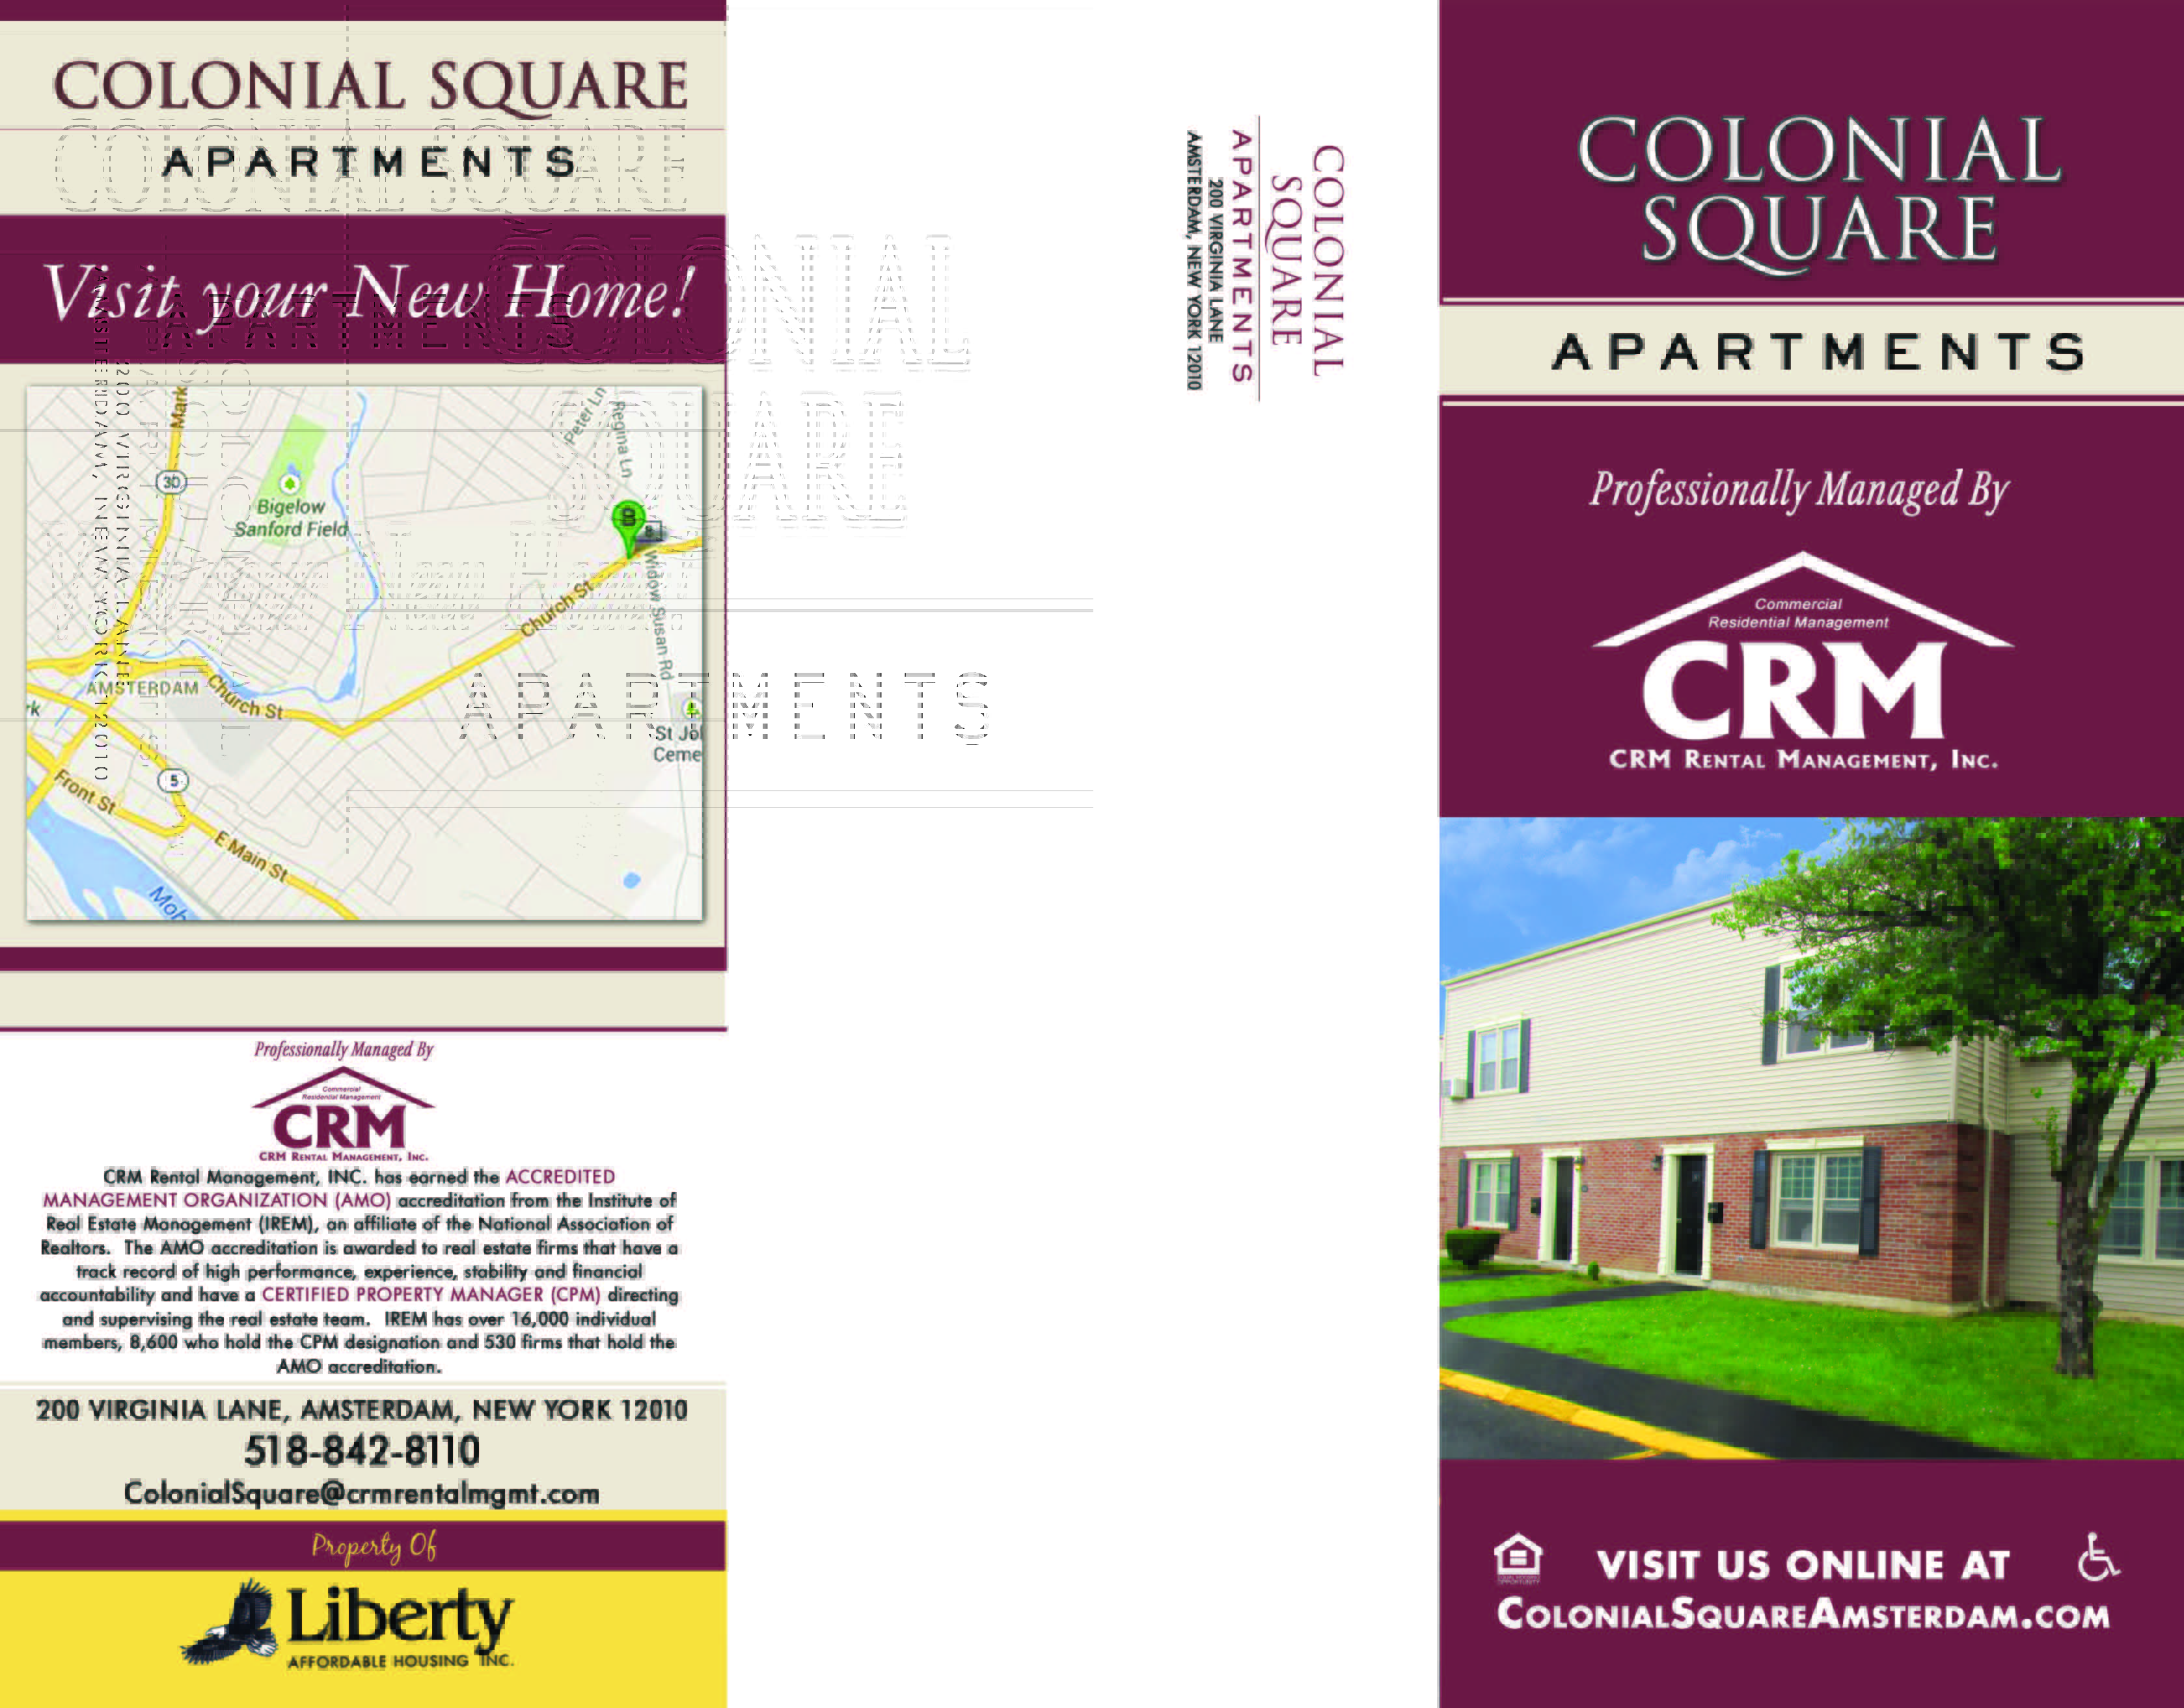 Colonial Square Brochure Page 1 of 2 